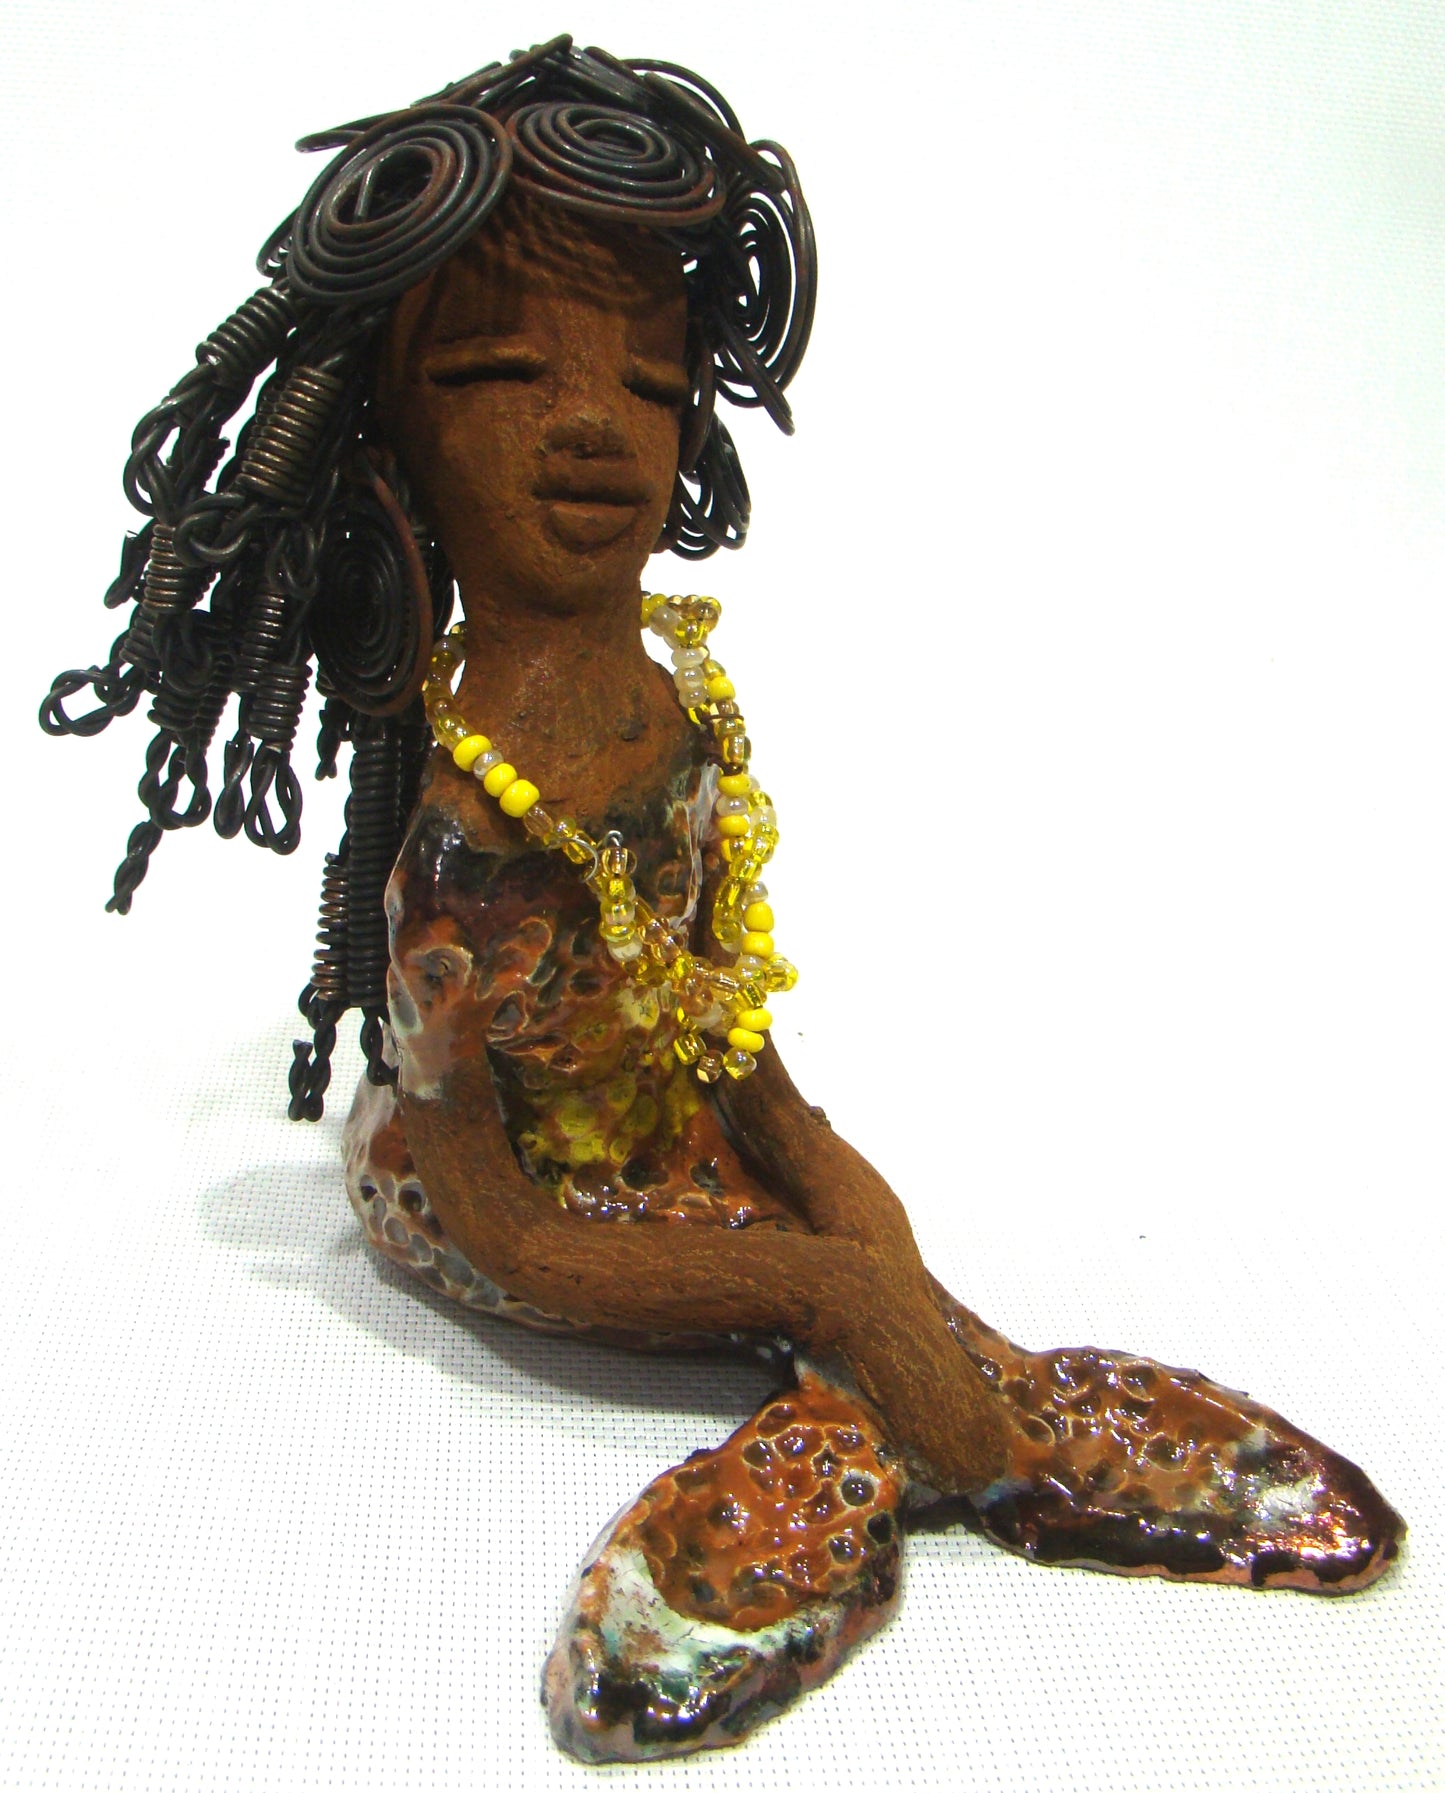 Meet Isabella the Mermaid!          Isabella stands 7' x 4" x 6" and weighs 1.08 lbs..         Isabella  has a lovely brown complexion.         Her long loving arms are crossed in her lap.         Isabella has over 20 feet of  wire hair.         It took over two hours to fix her hair!         Isabella has a metallic yellow swimsuit with flashes of copper.         She wears a yellow beaded necklace.  Isabella appears to have something on her mind!